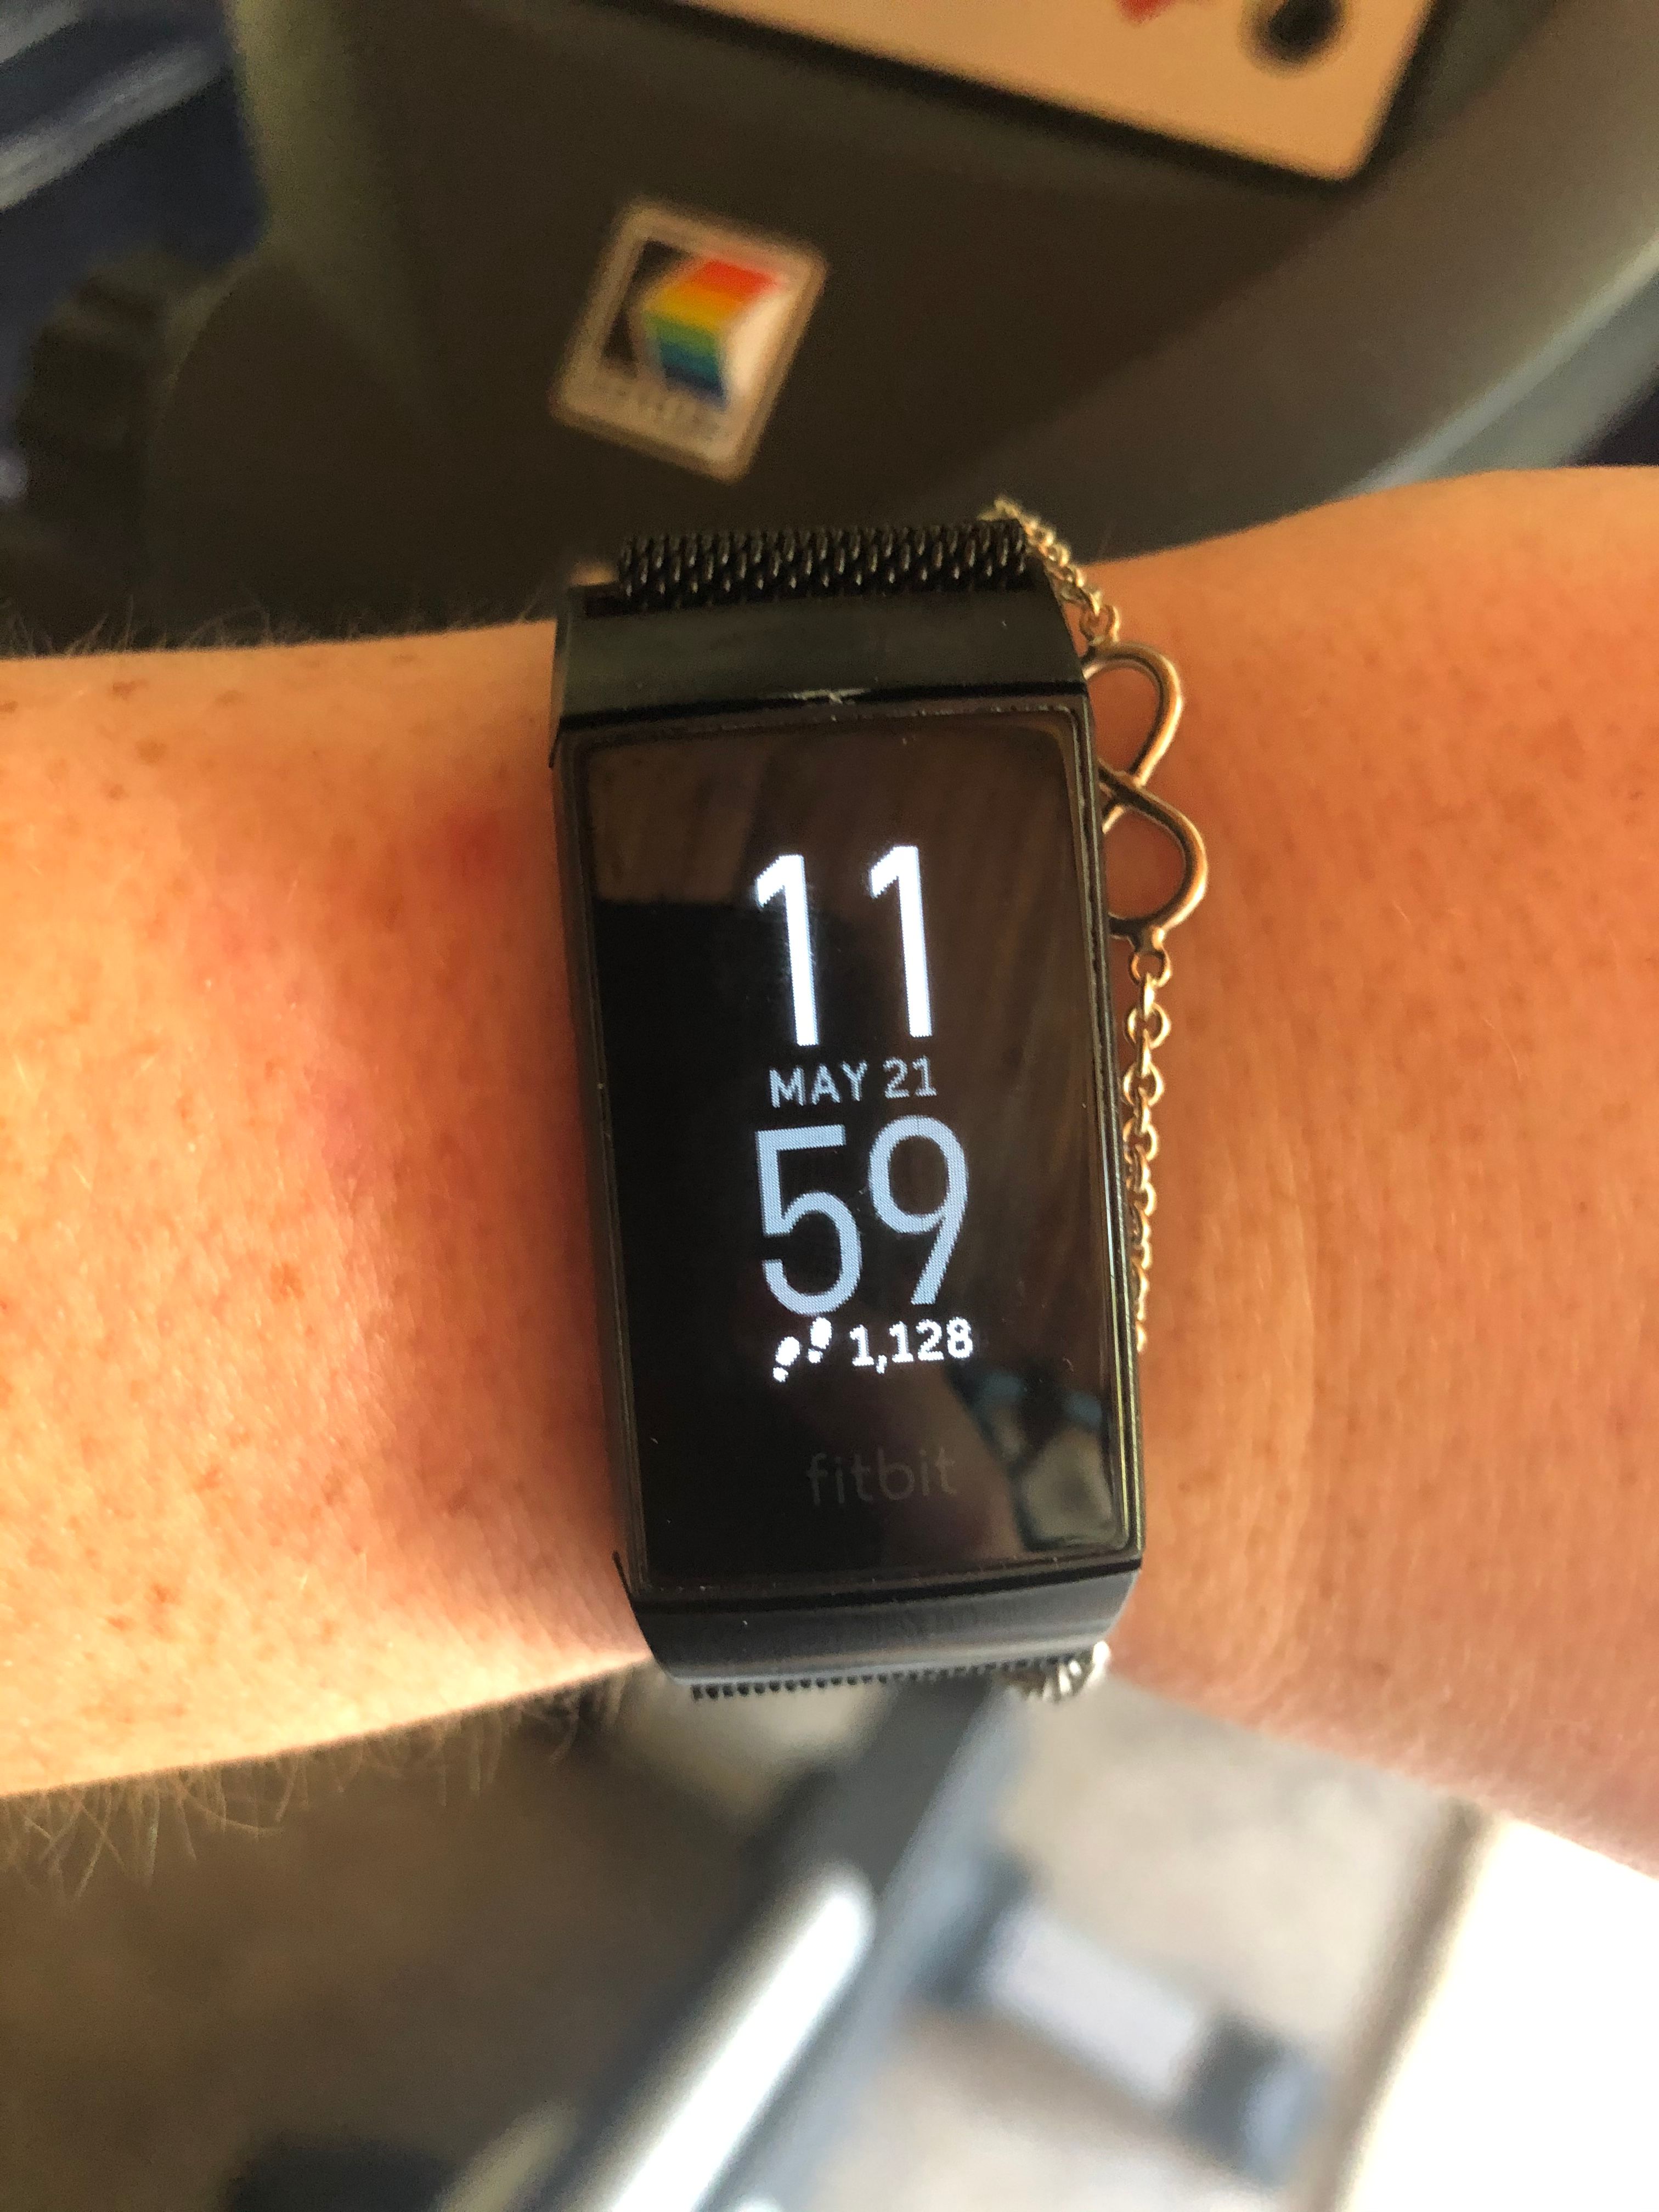 fitbit undercounting steps